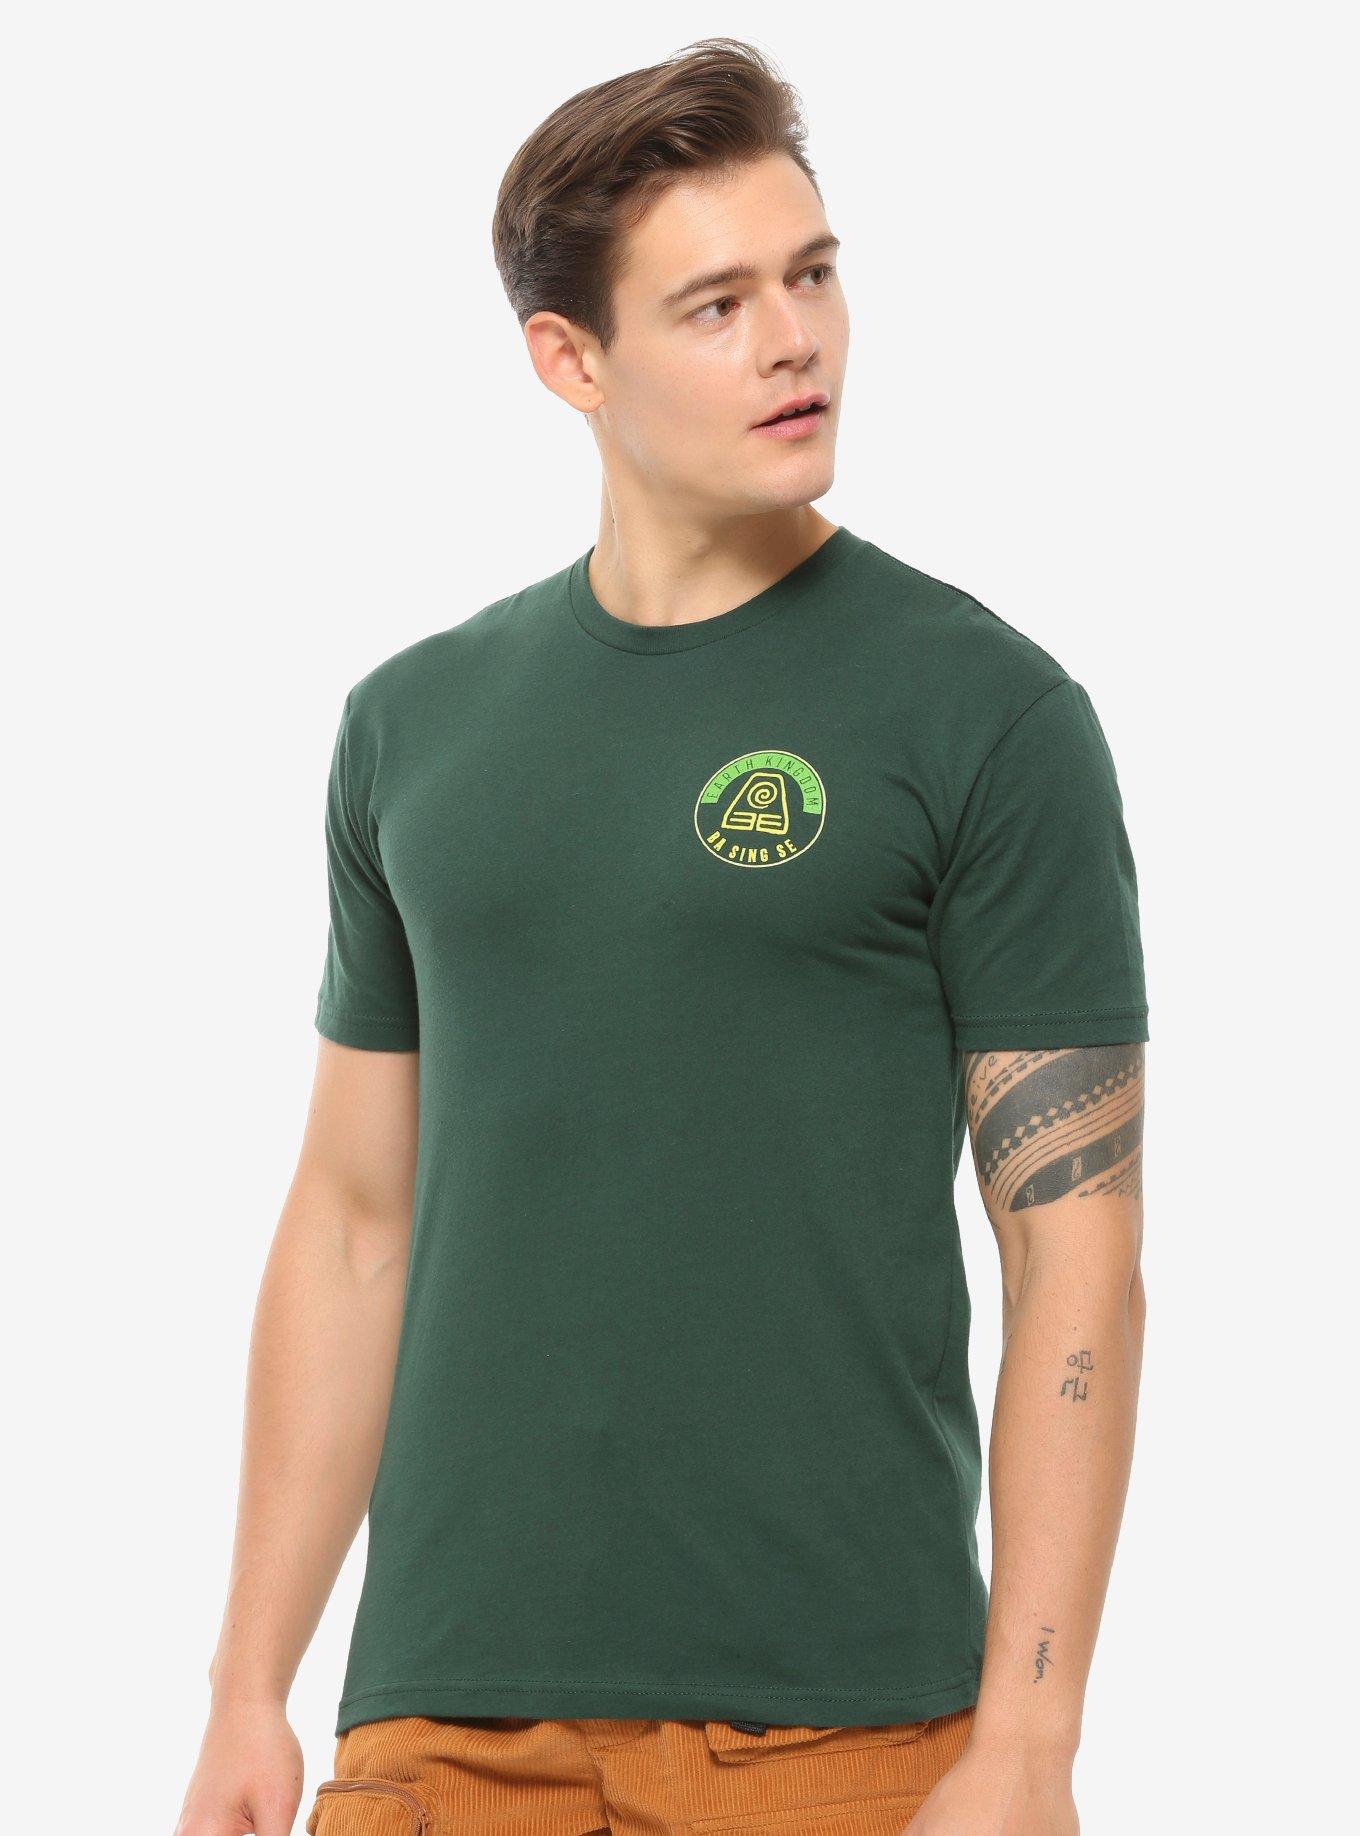 Avatar: The Last Airbender Earth Kingdom Ba Sing Se T-Shirt - BoxLunch Exclusive, GREEN, alternate